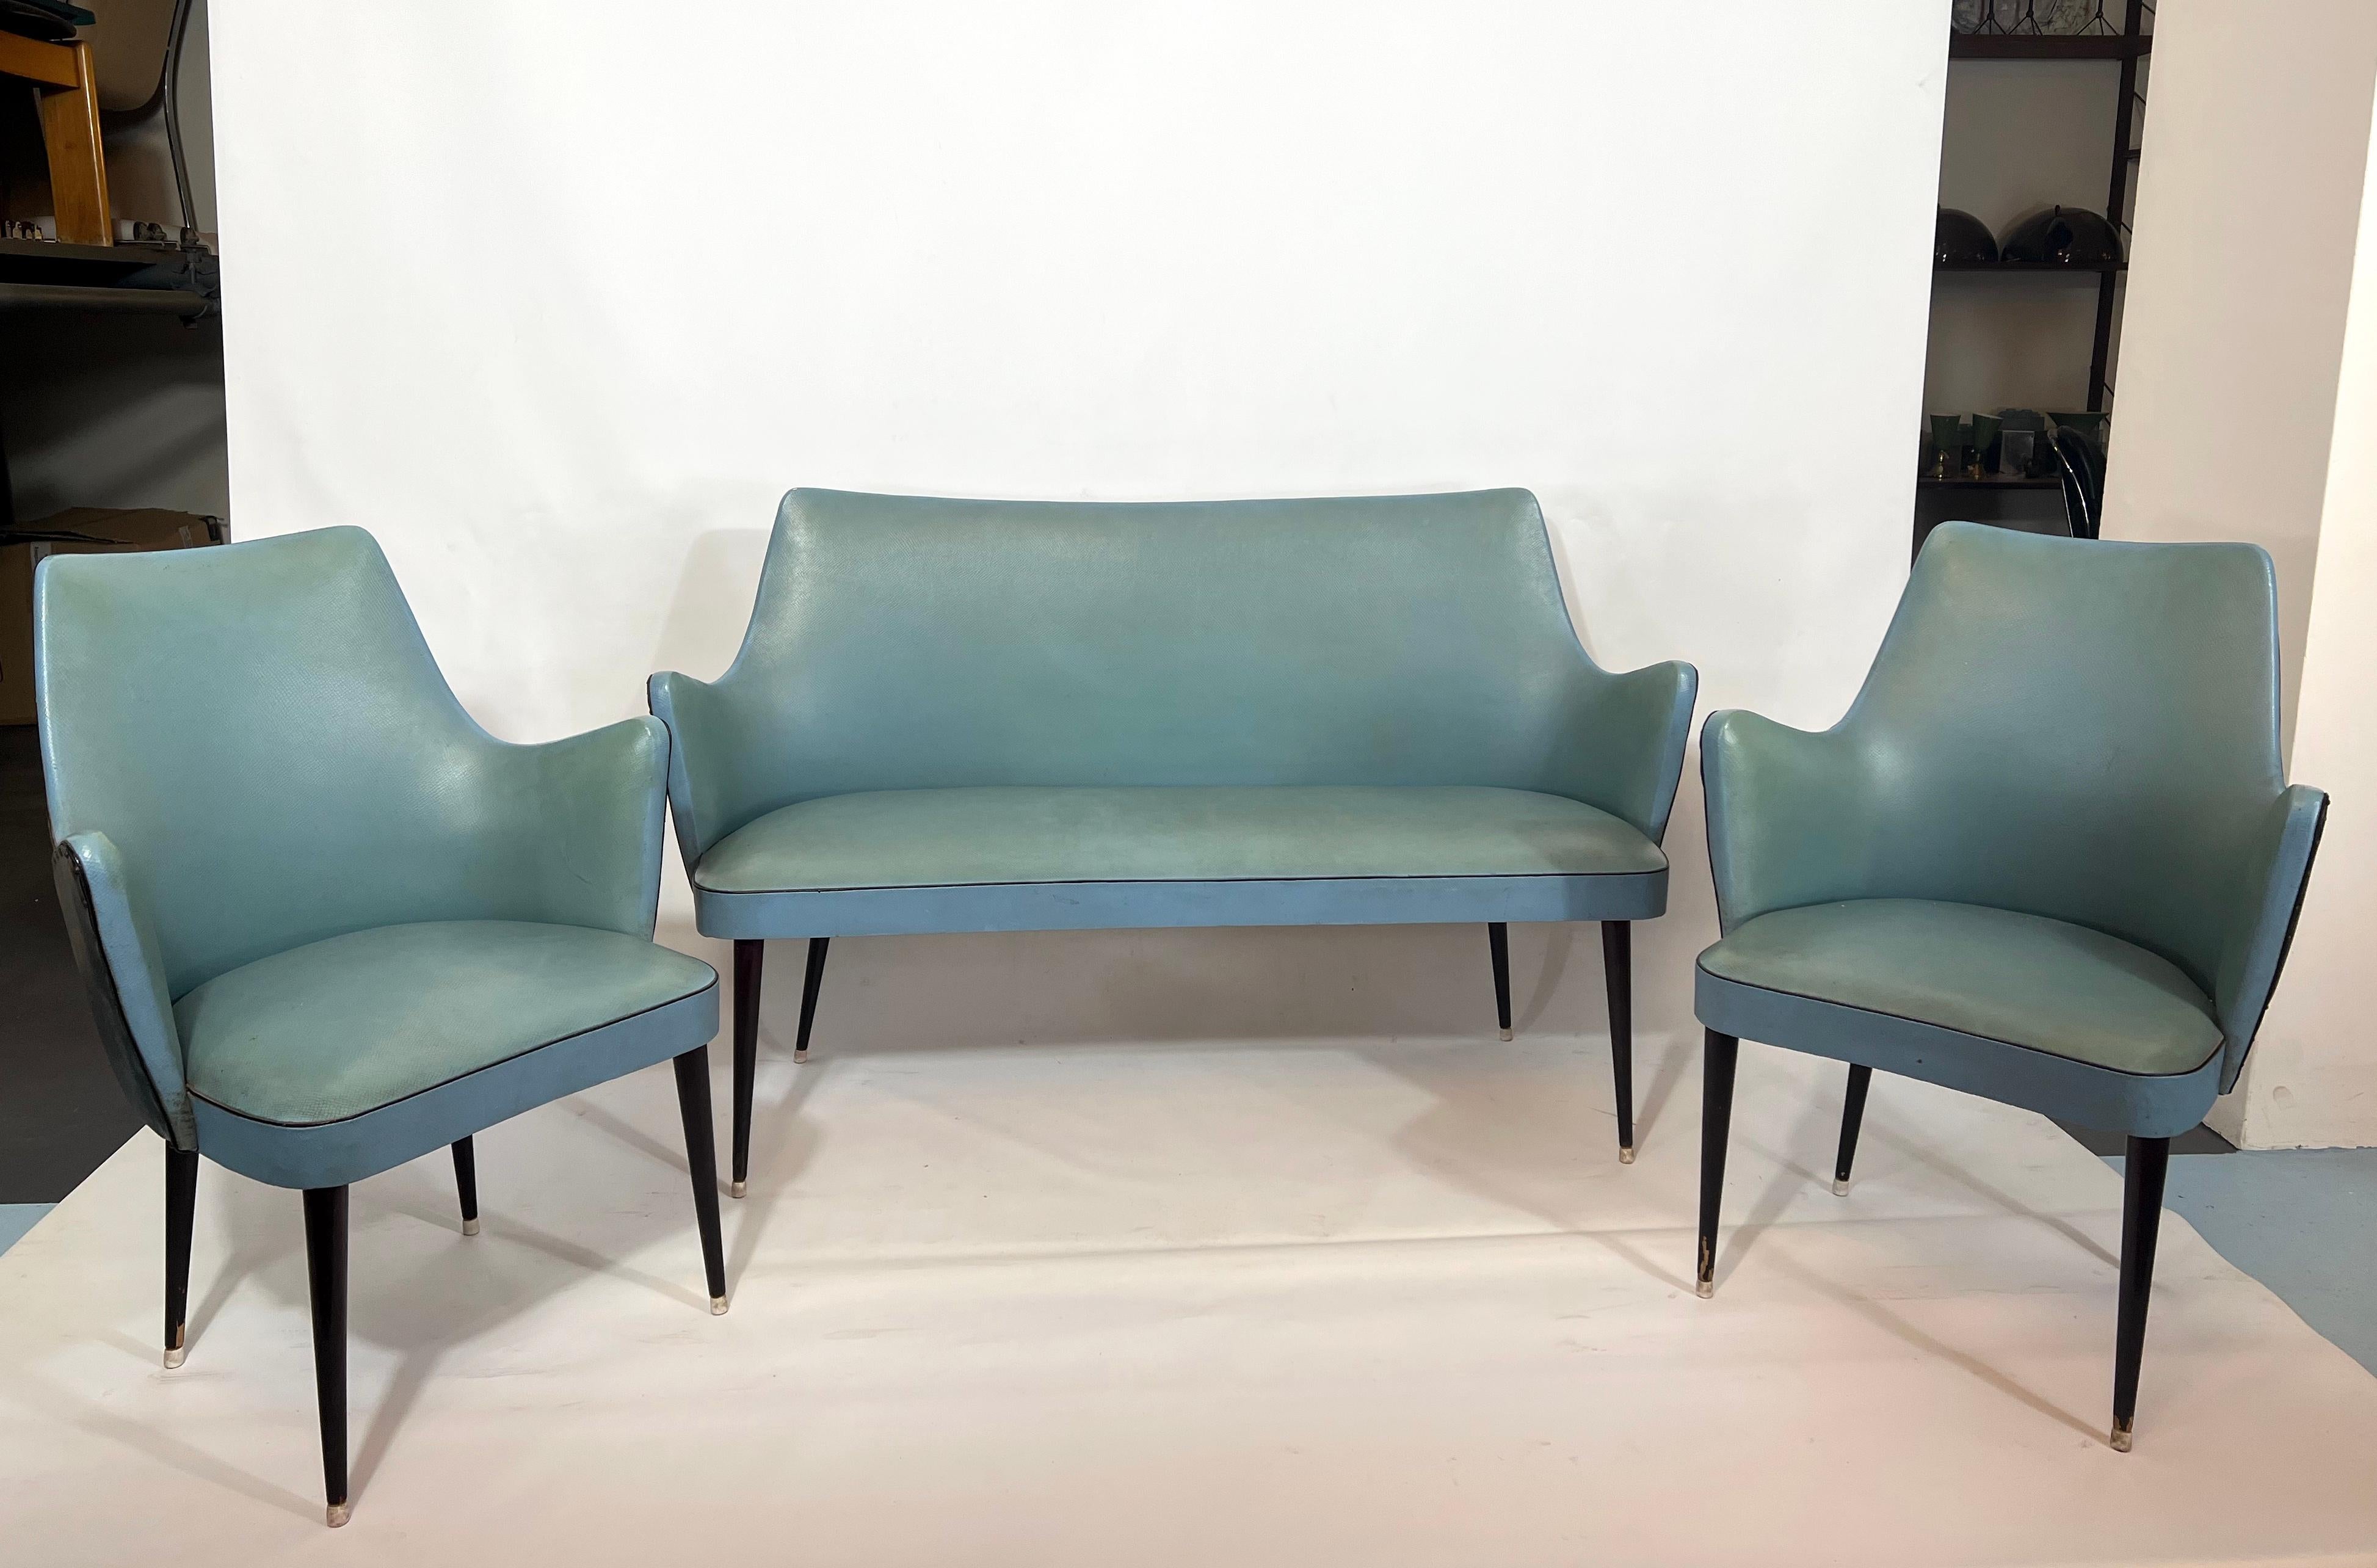 Good vintage condition for this set of one two-seater and two armchairs designed by Osvaldo Borsani and produced in Italy during the 50s. Original black and turquoise sky with trace of age and use. Dimensions: sofa H 82 W 135 D 58, armchair H 82 W